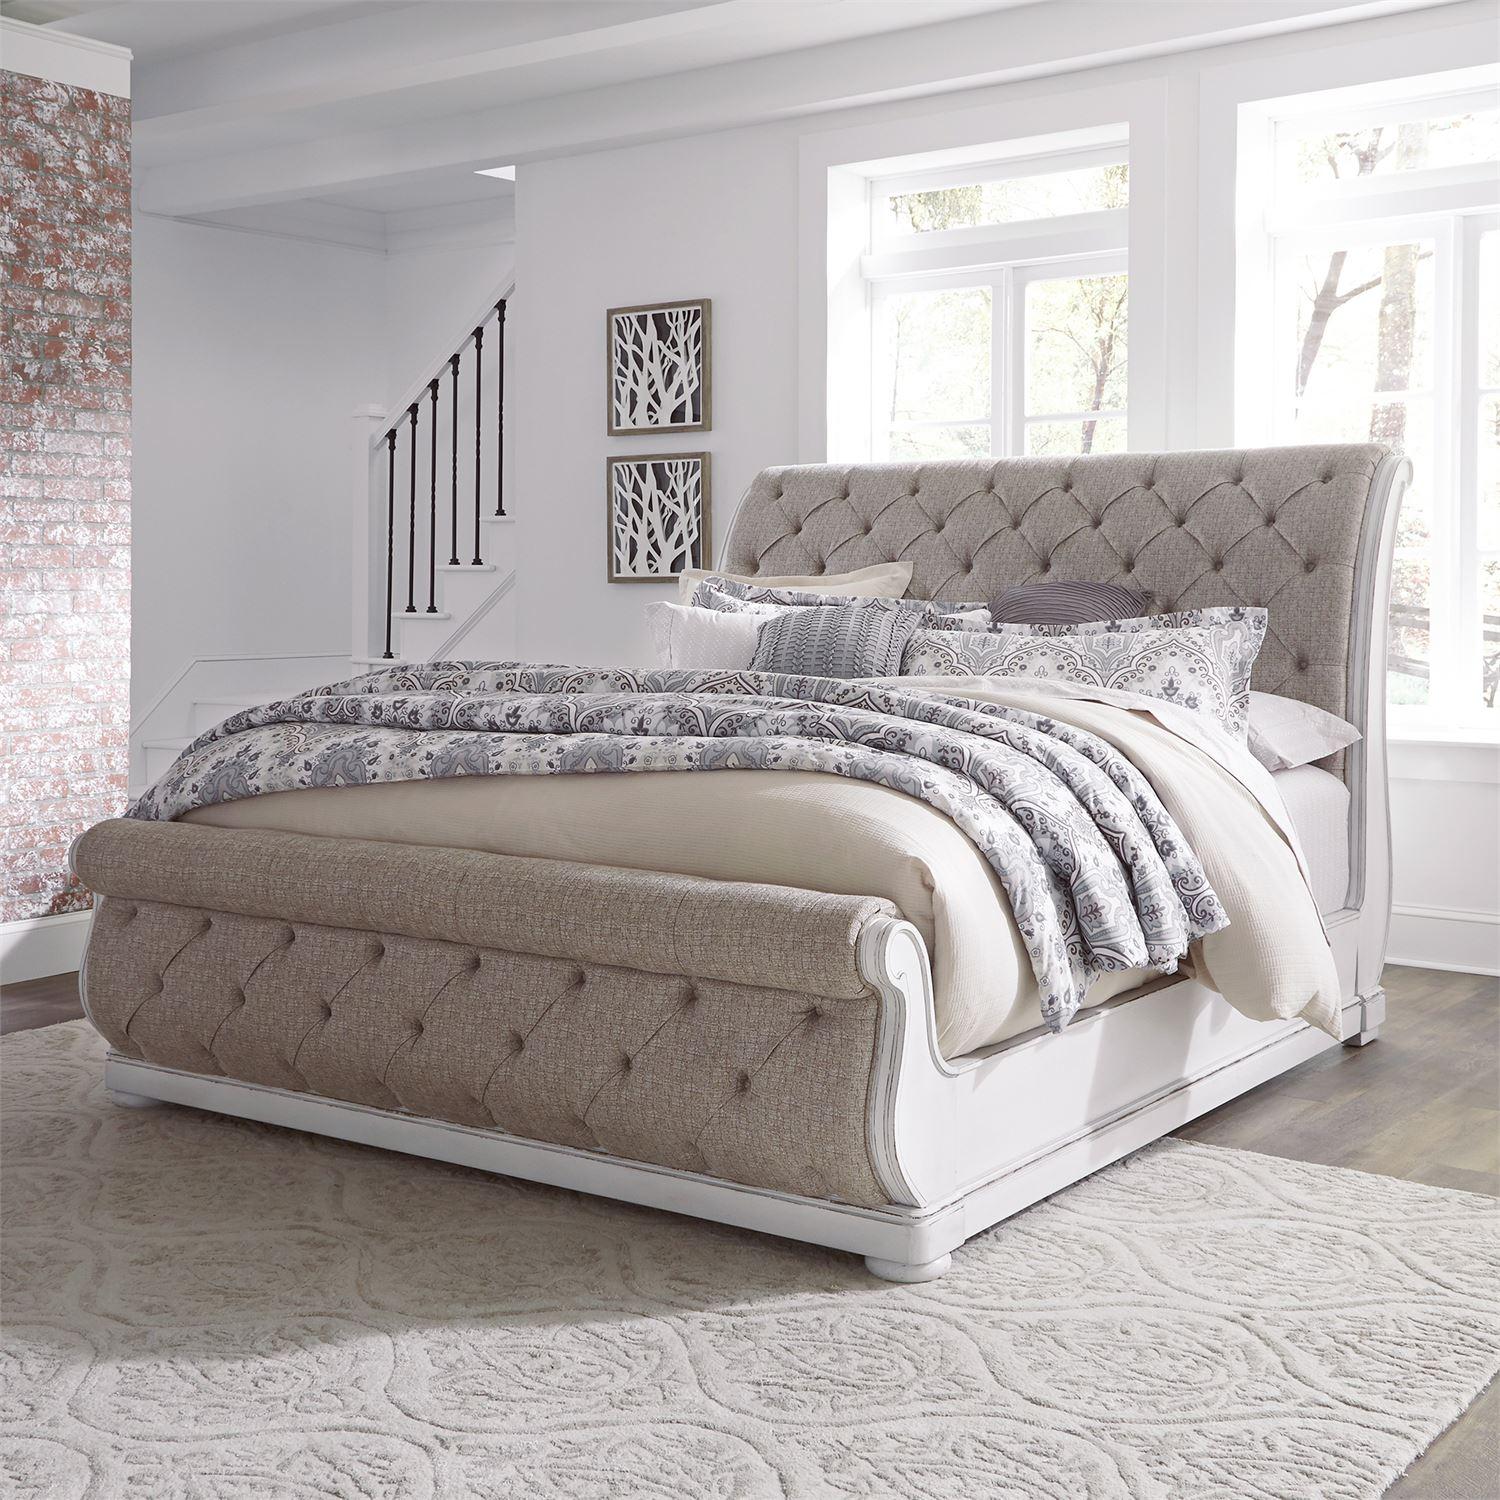 European Traditional Sleigh Bed Magnolia Manor  (244-BR) Sleigh Bed 244-BR-KUSL in White Chenille